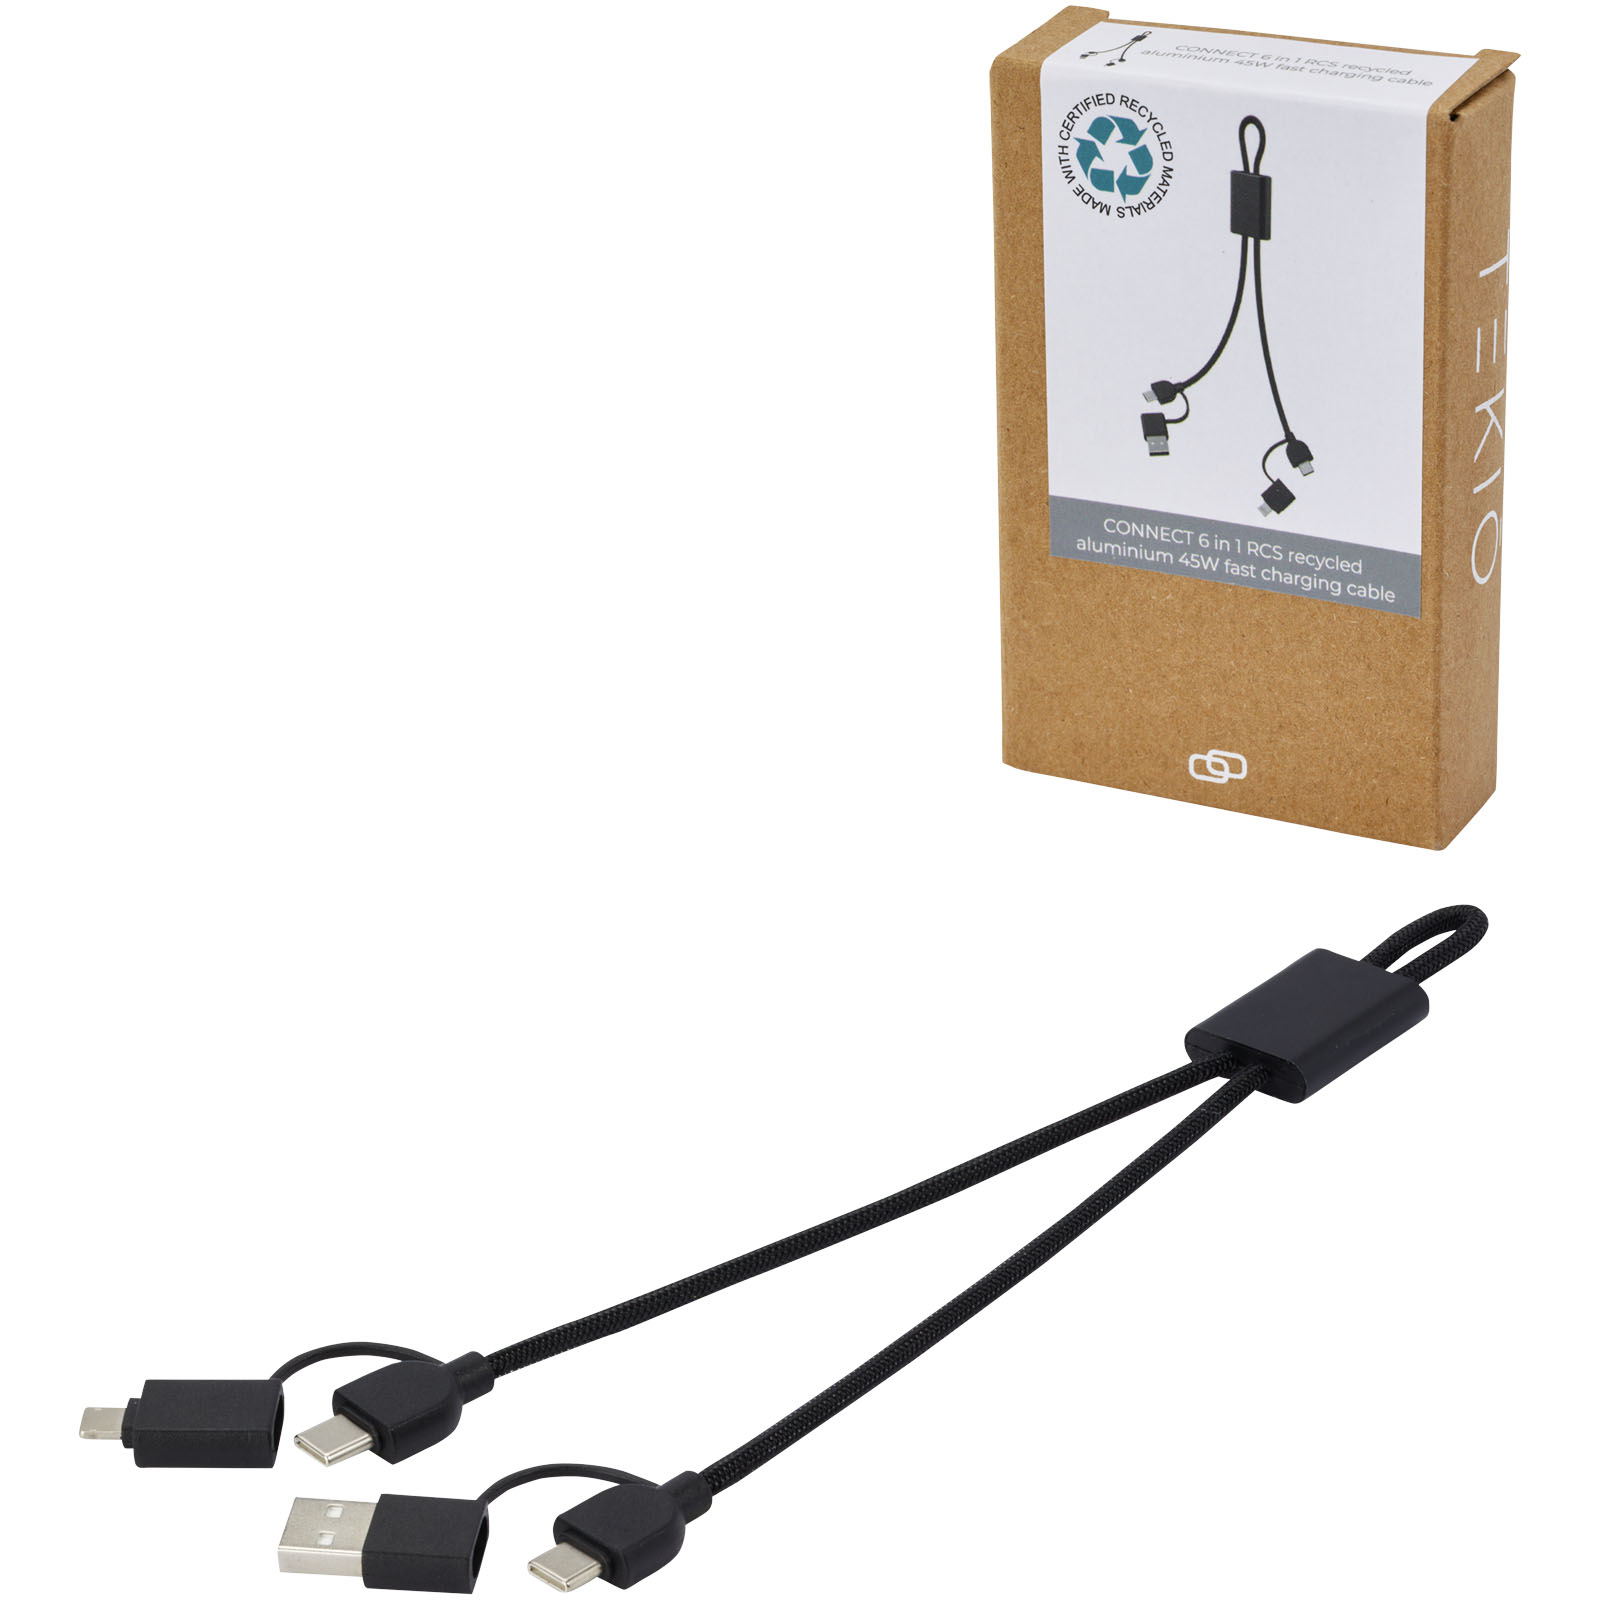 Advertising Cables - Connect 6-in-1 RCS recycled aluminium 45W quick charge & data transfer cable